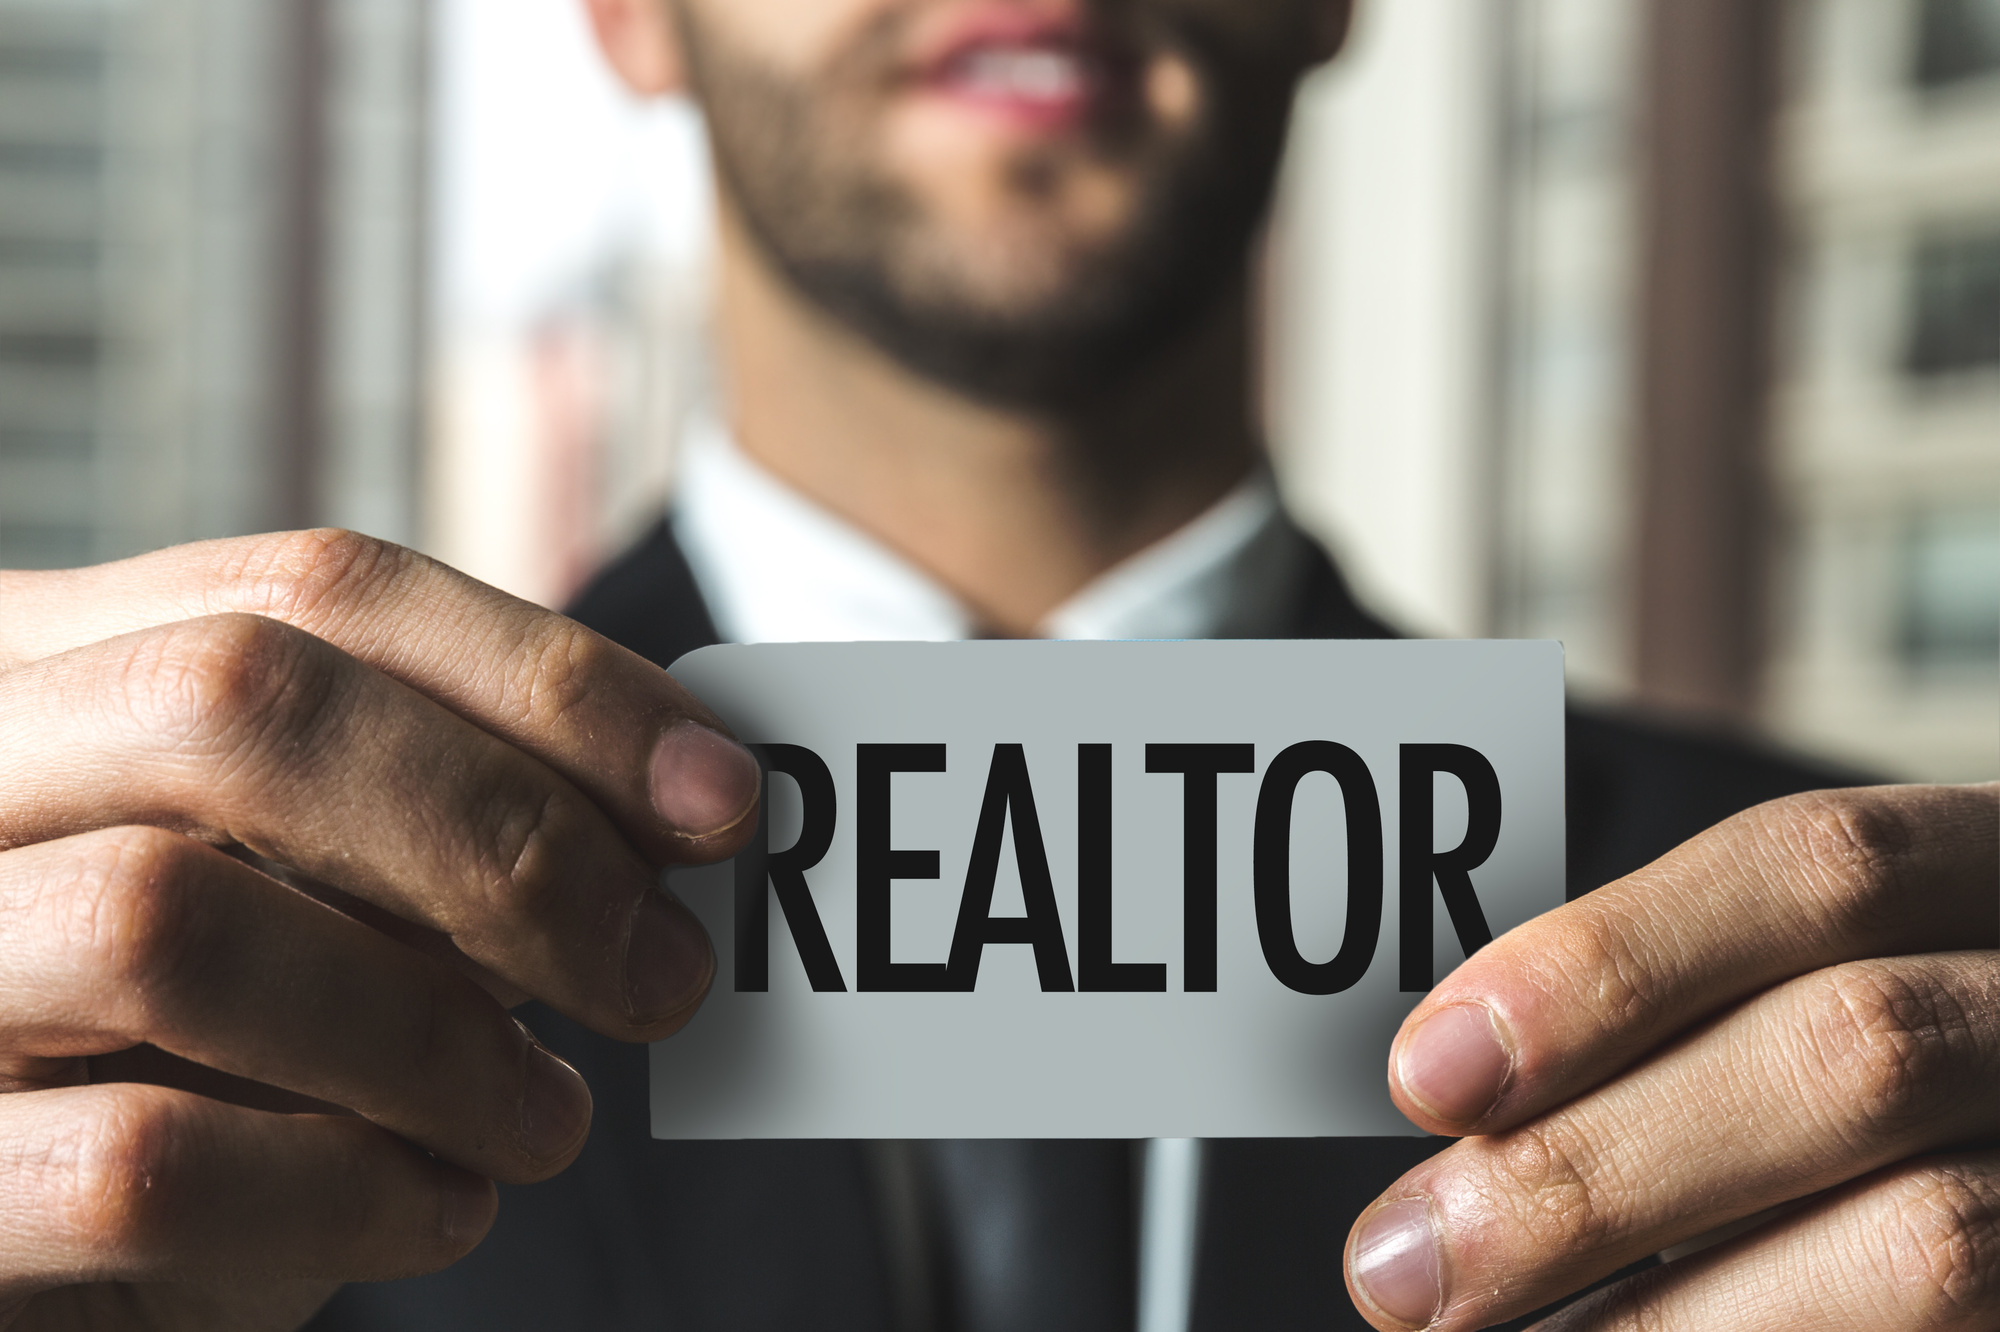 Did you know that not all real estate agents are created equal these days? Here's how you can avoid the most common mistakes when choosing the best realtor.